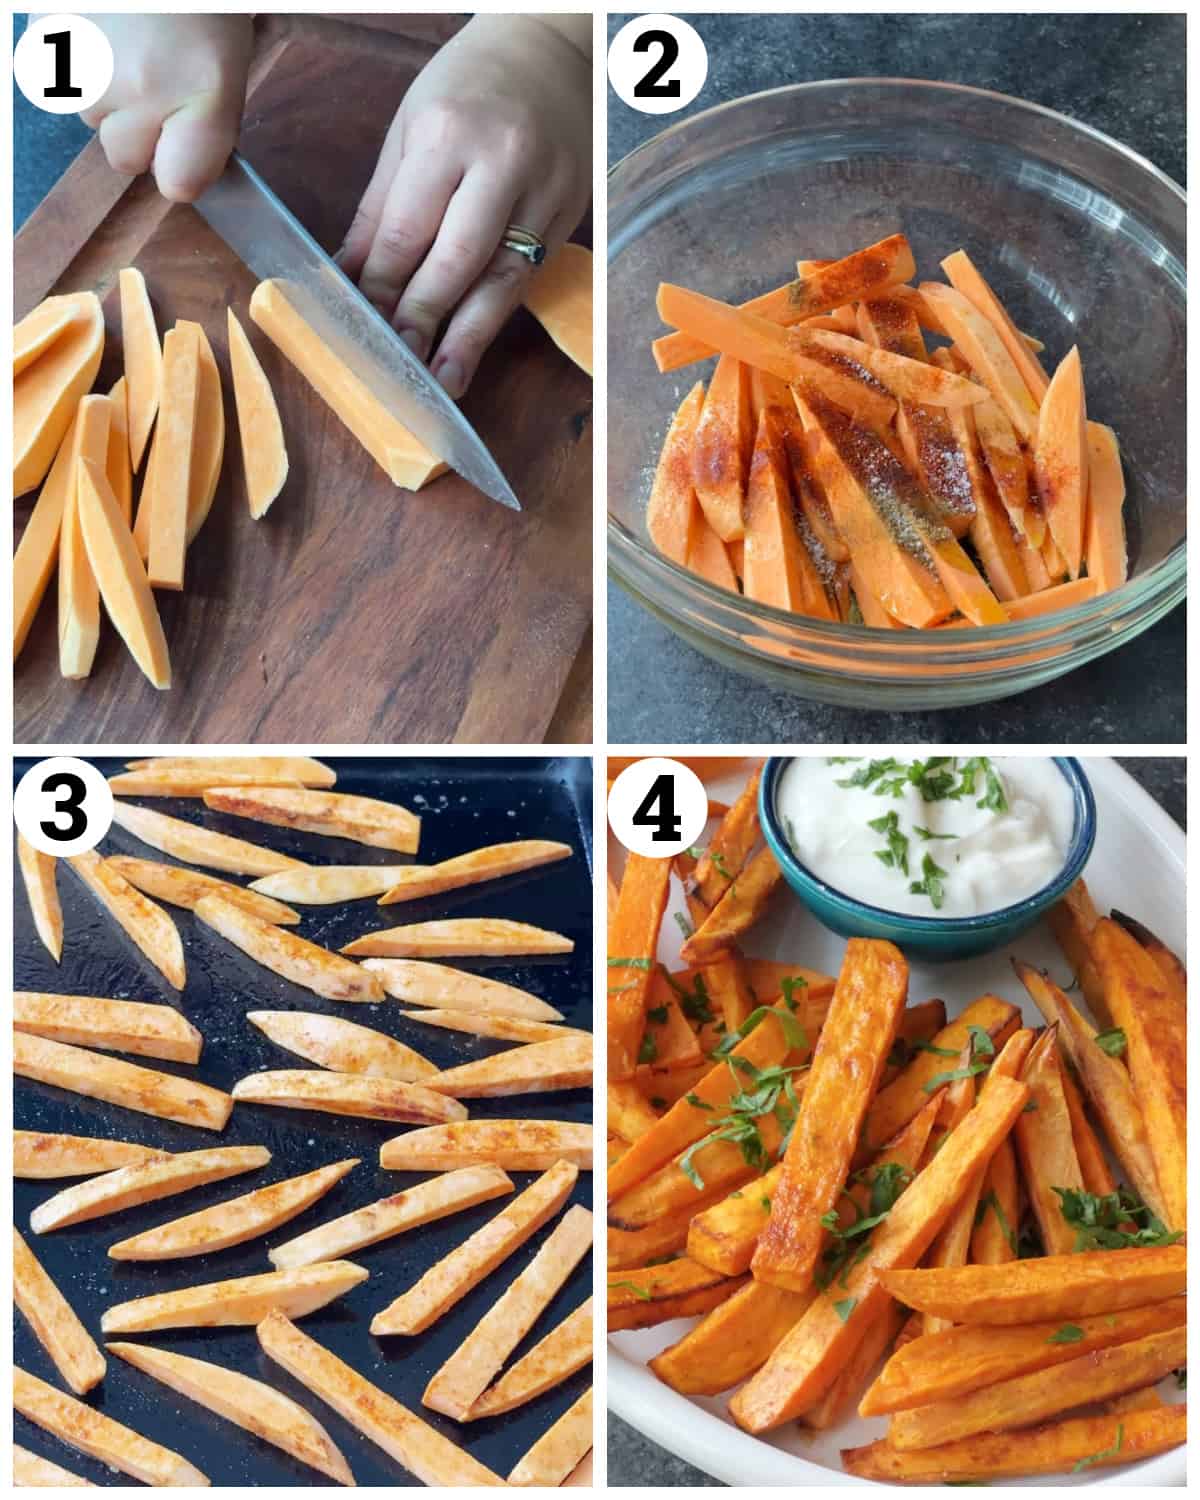 Cut the sweet potatoes into sticks., mix with olive oil and spices then bake in the oven. 